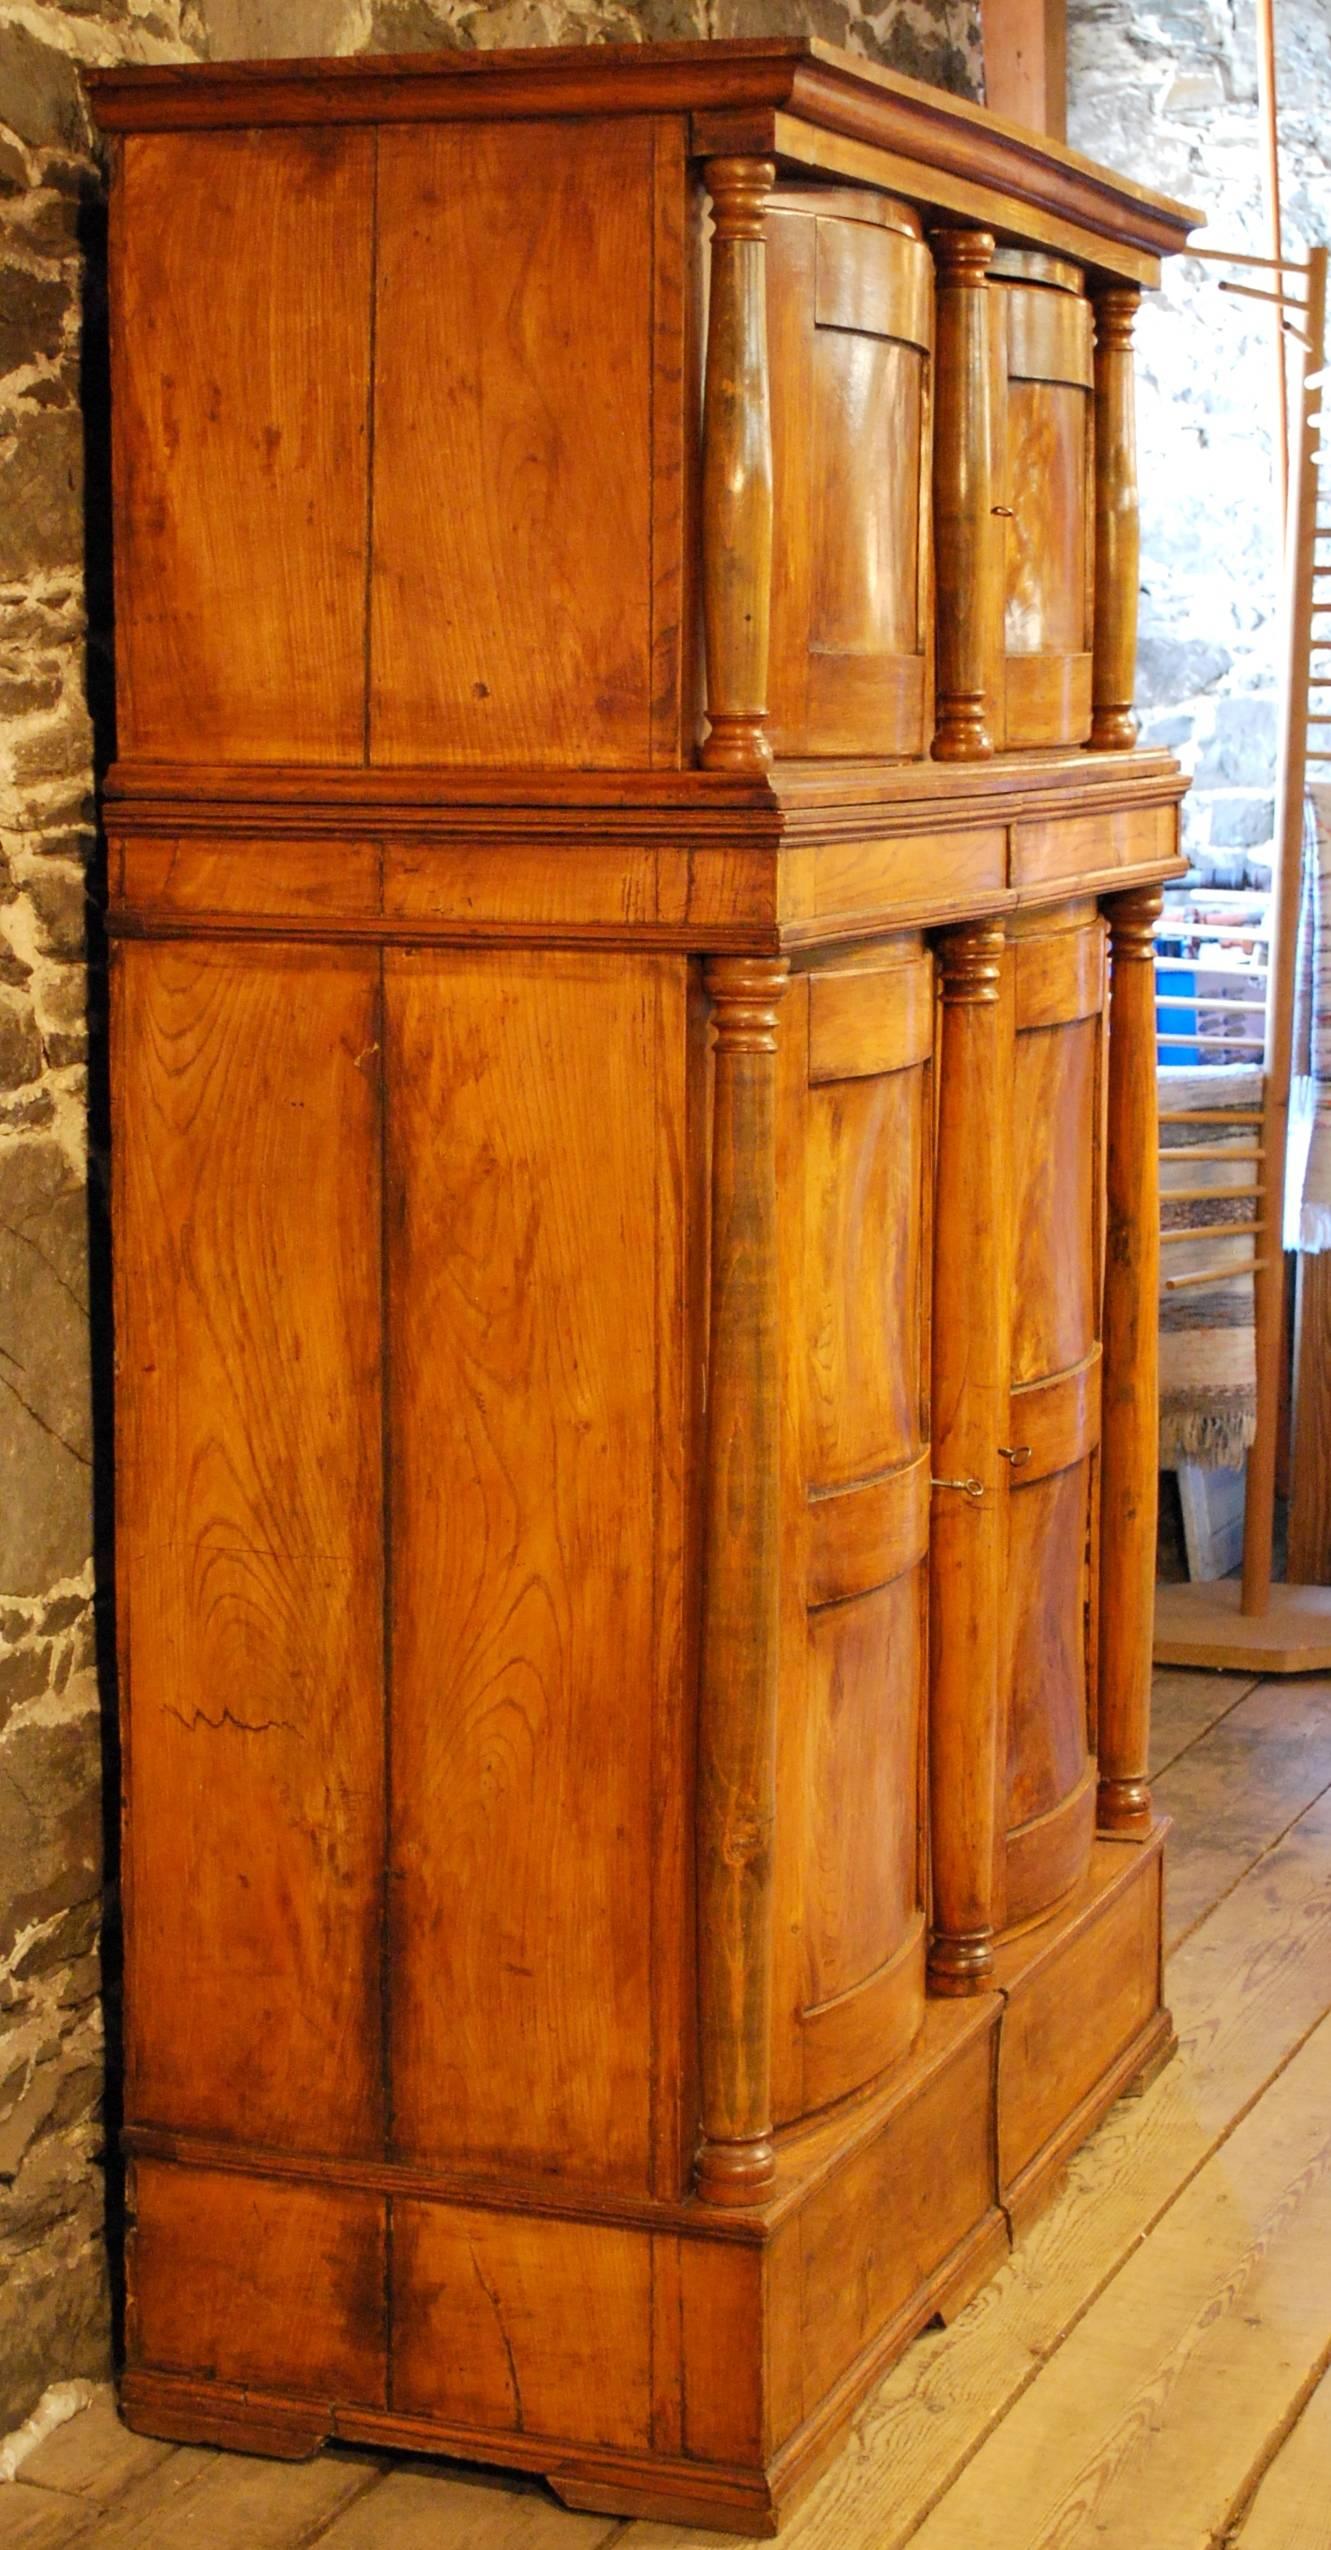 A striking antique Danish elmwood four door hat cabinet featuring a two-tiered bow Front design with impressive architectural details and a roomy interior: beautiful elegant storage or closet which could be in a public room. Transports in three